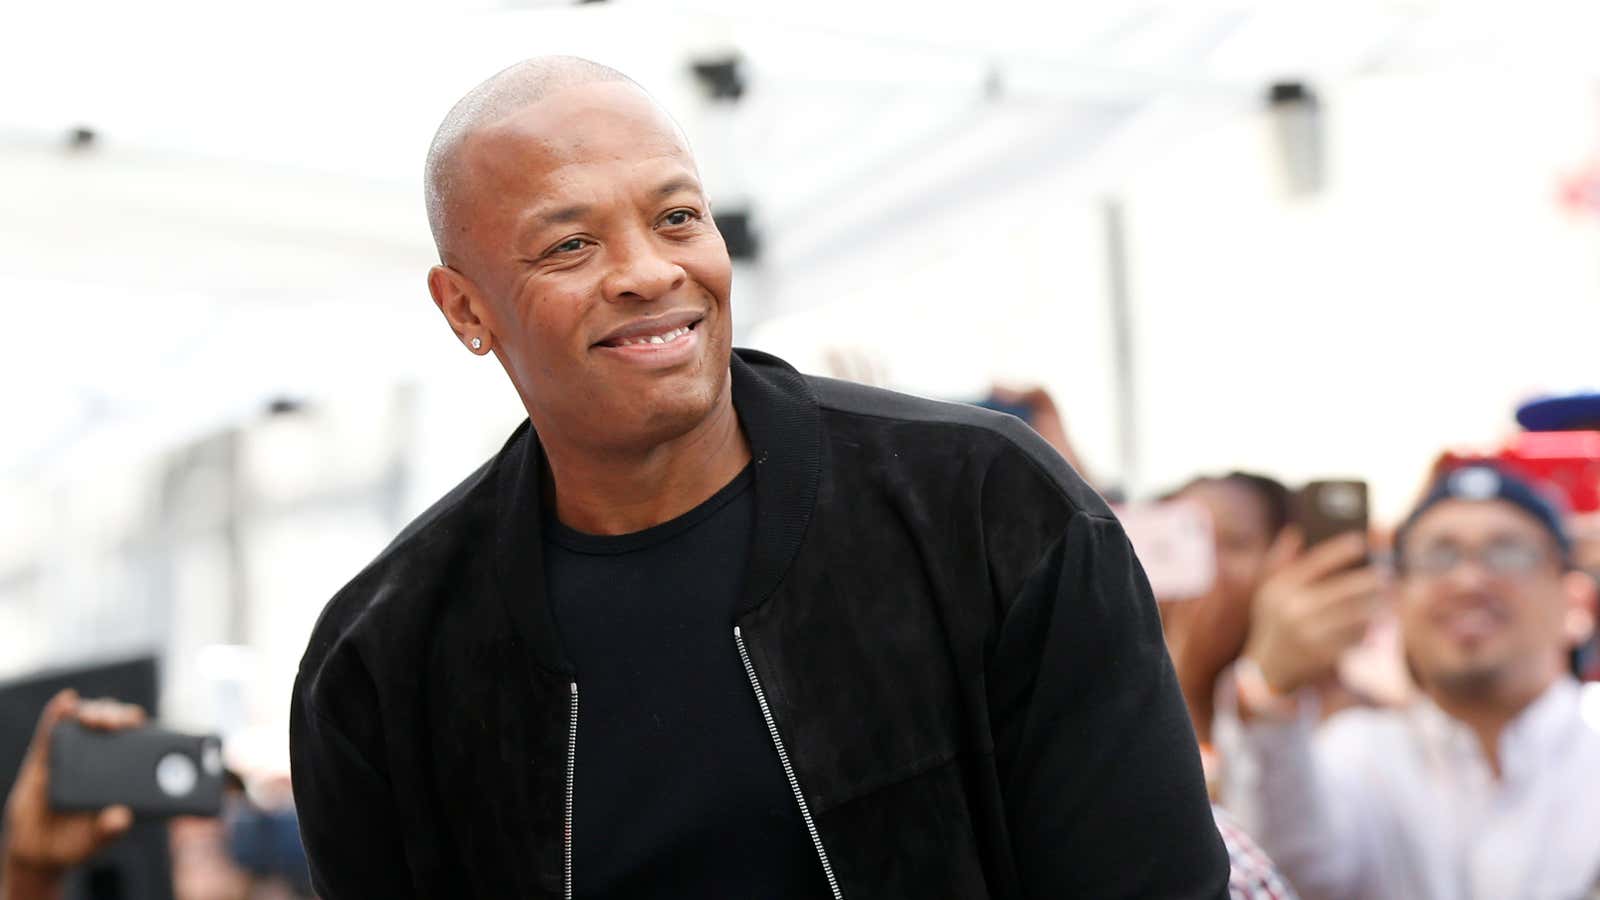 Dr. Dre and Jimmy Iovine’s new school will focus on teaching students about science and the music industry.